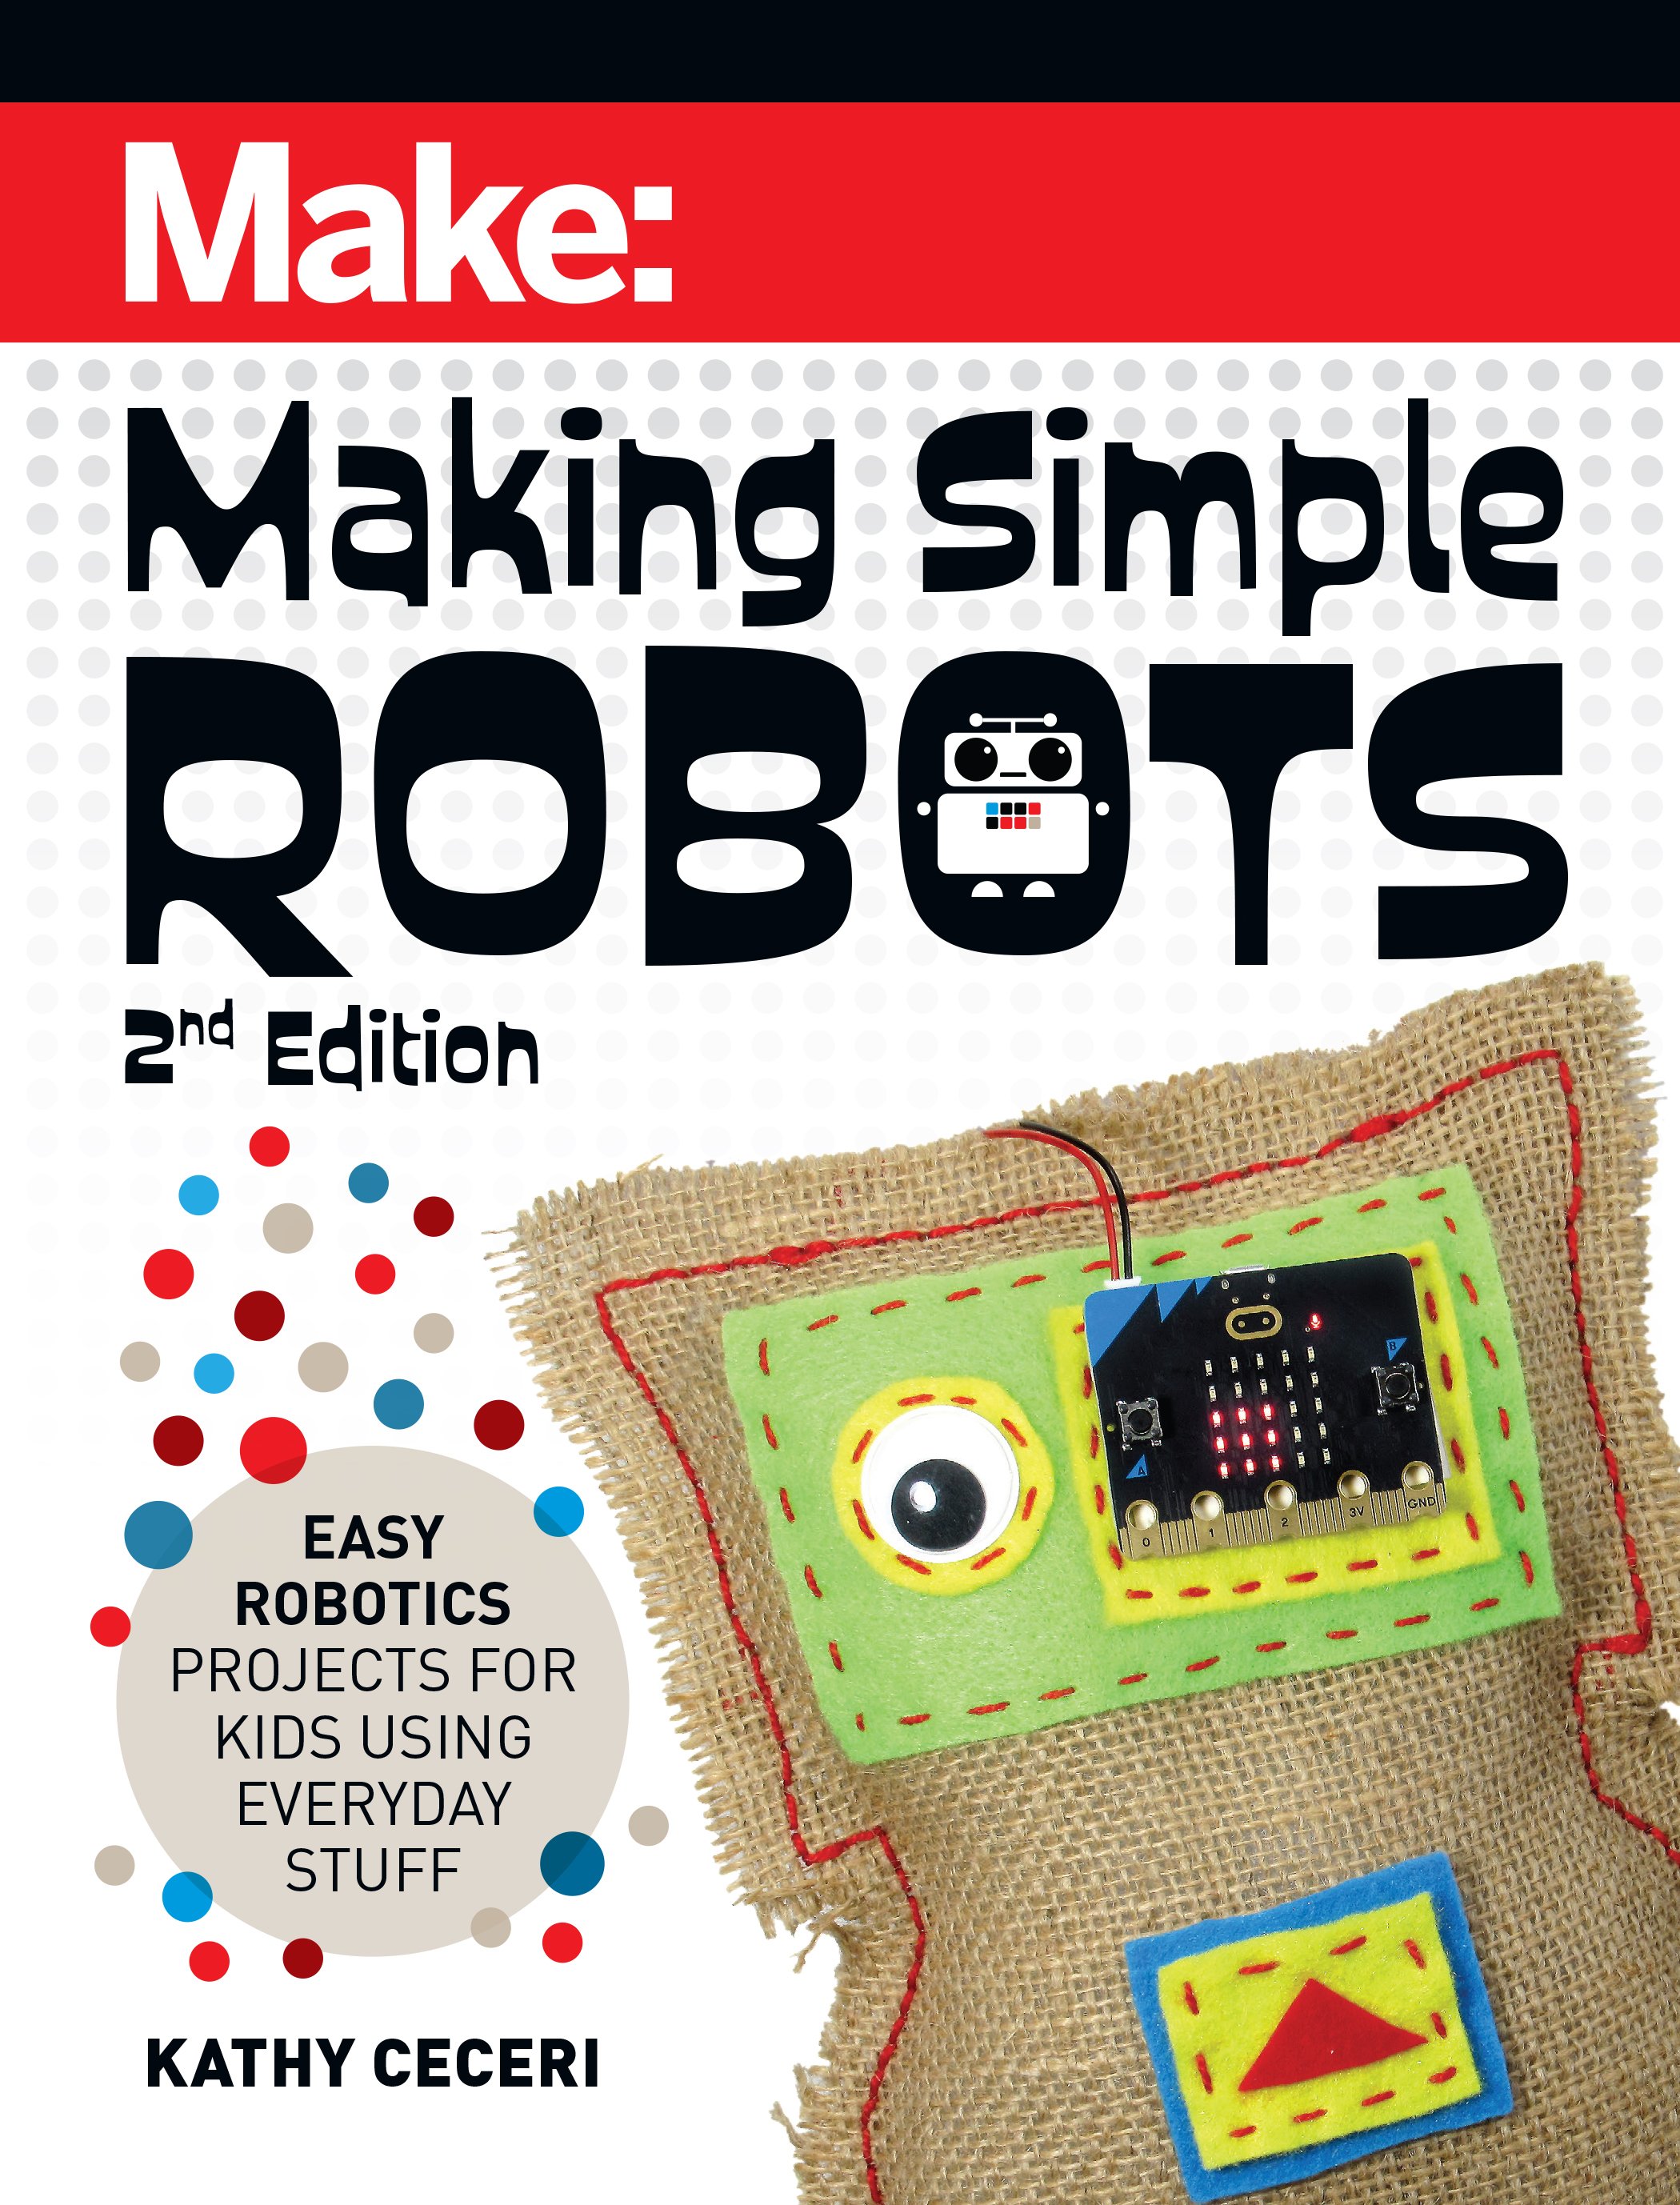 Making Simple Robots book